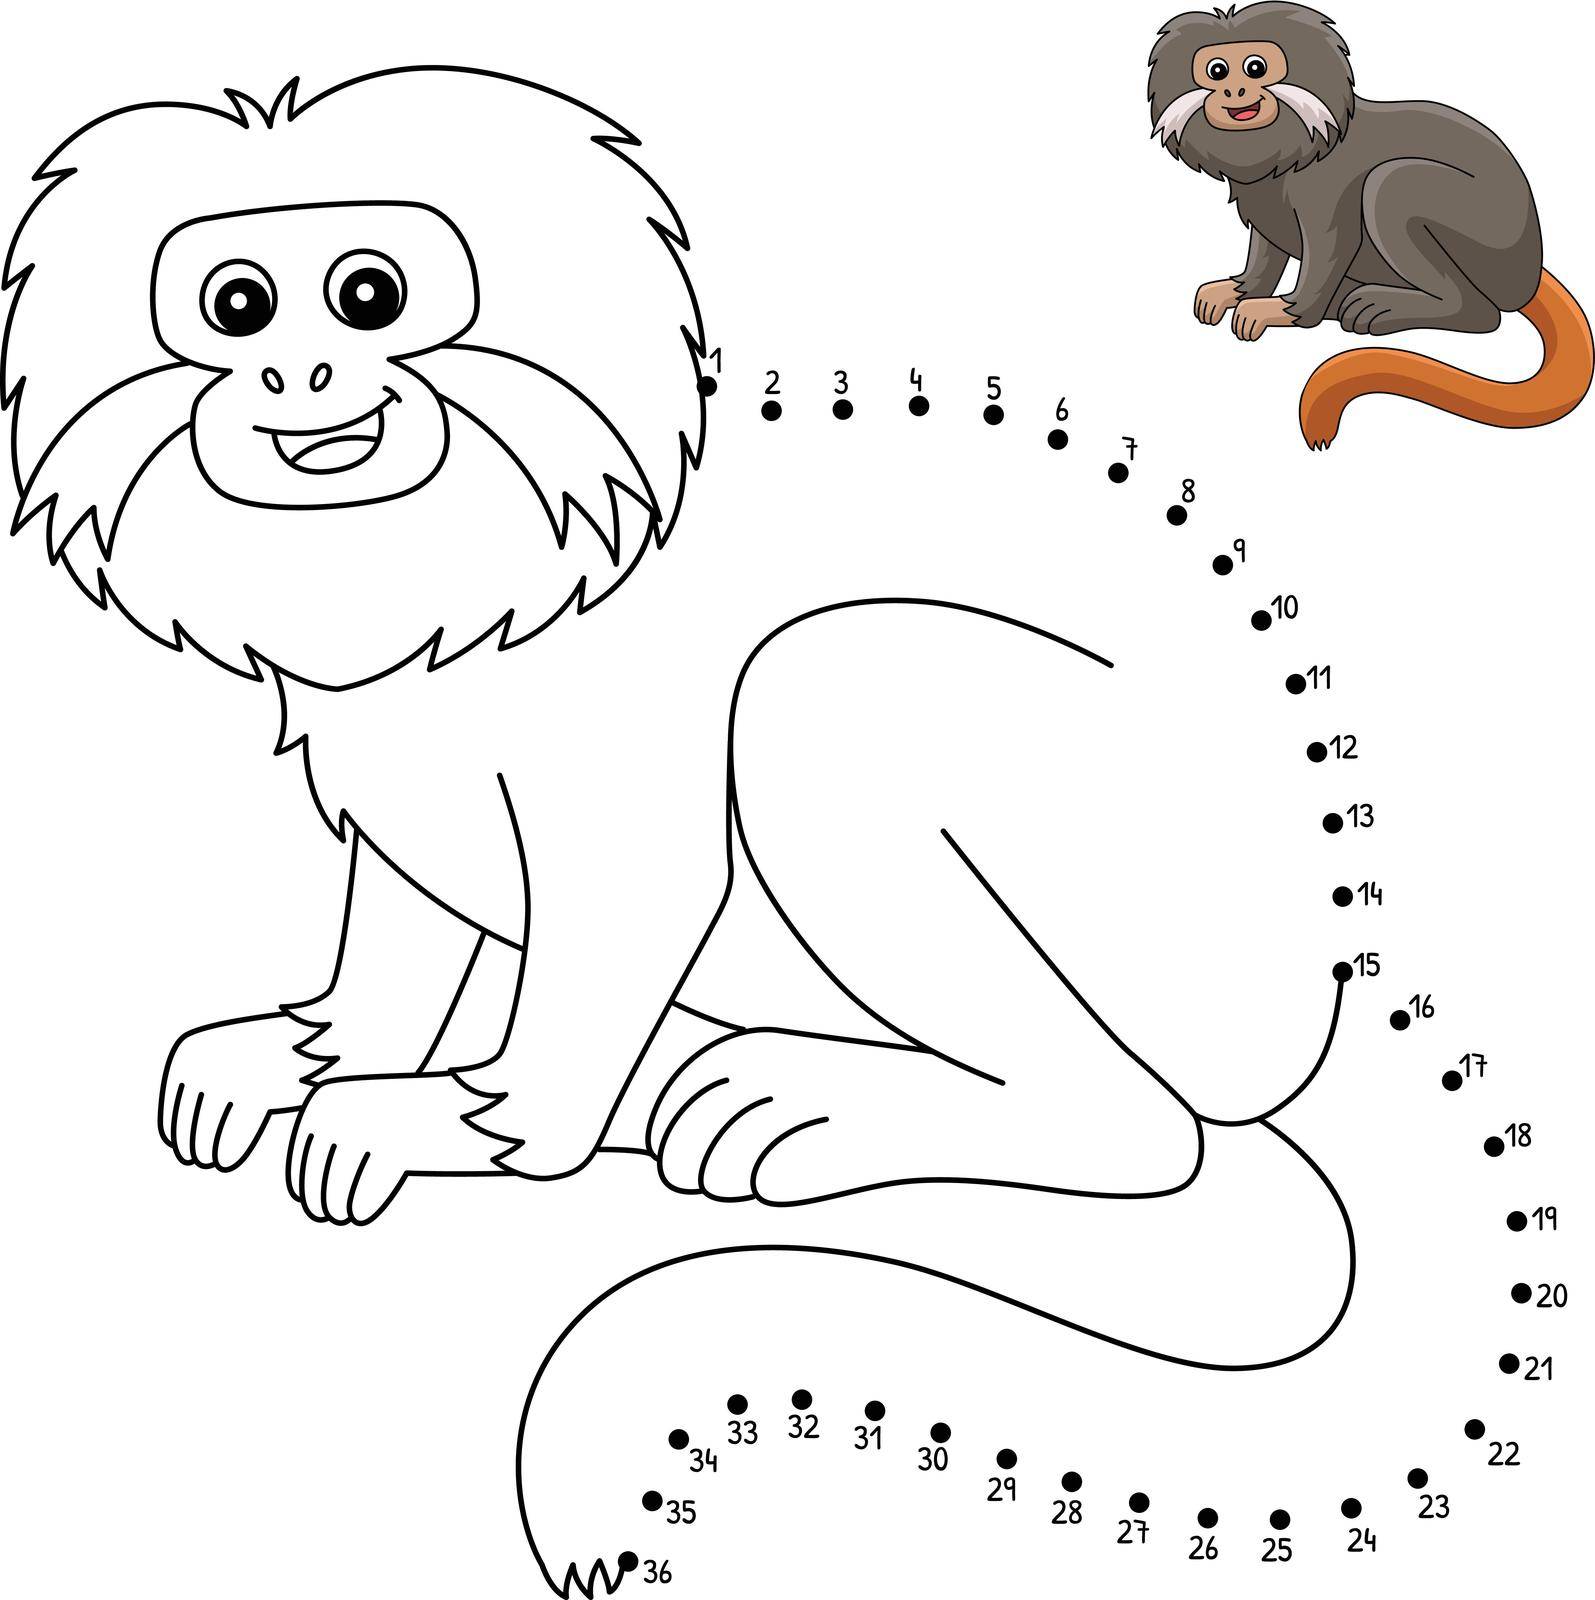 A cute and funny connect-the-dots coloring page of a Tamarin Animal. Provides hours of coloring fun for children. Color, this page is very easy. Suitable for little kids and toddlers.